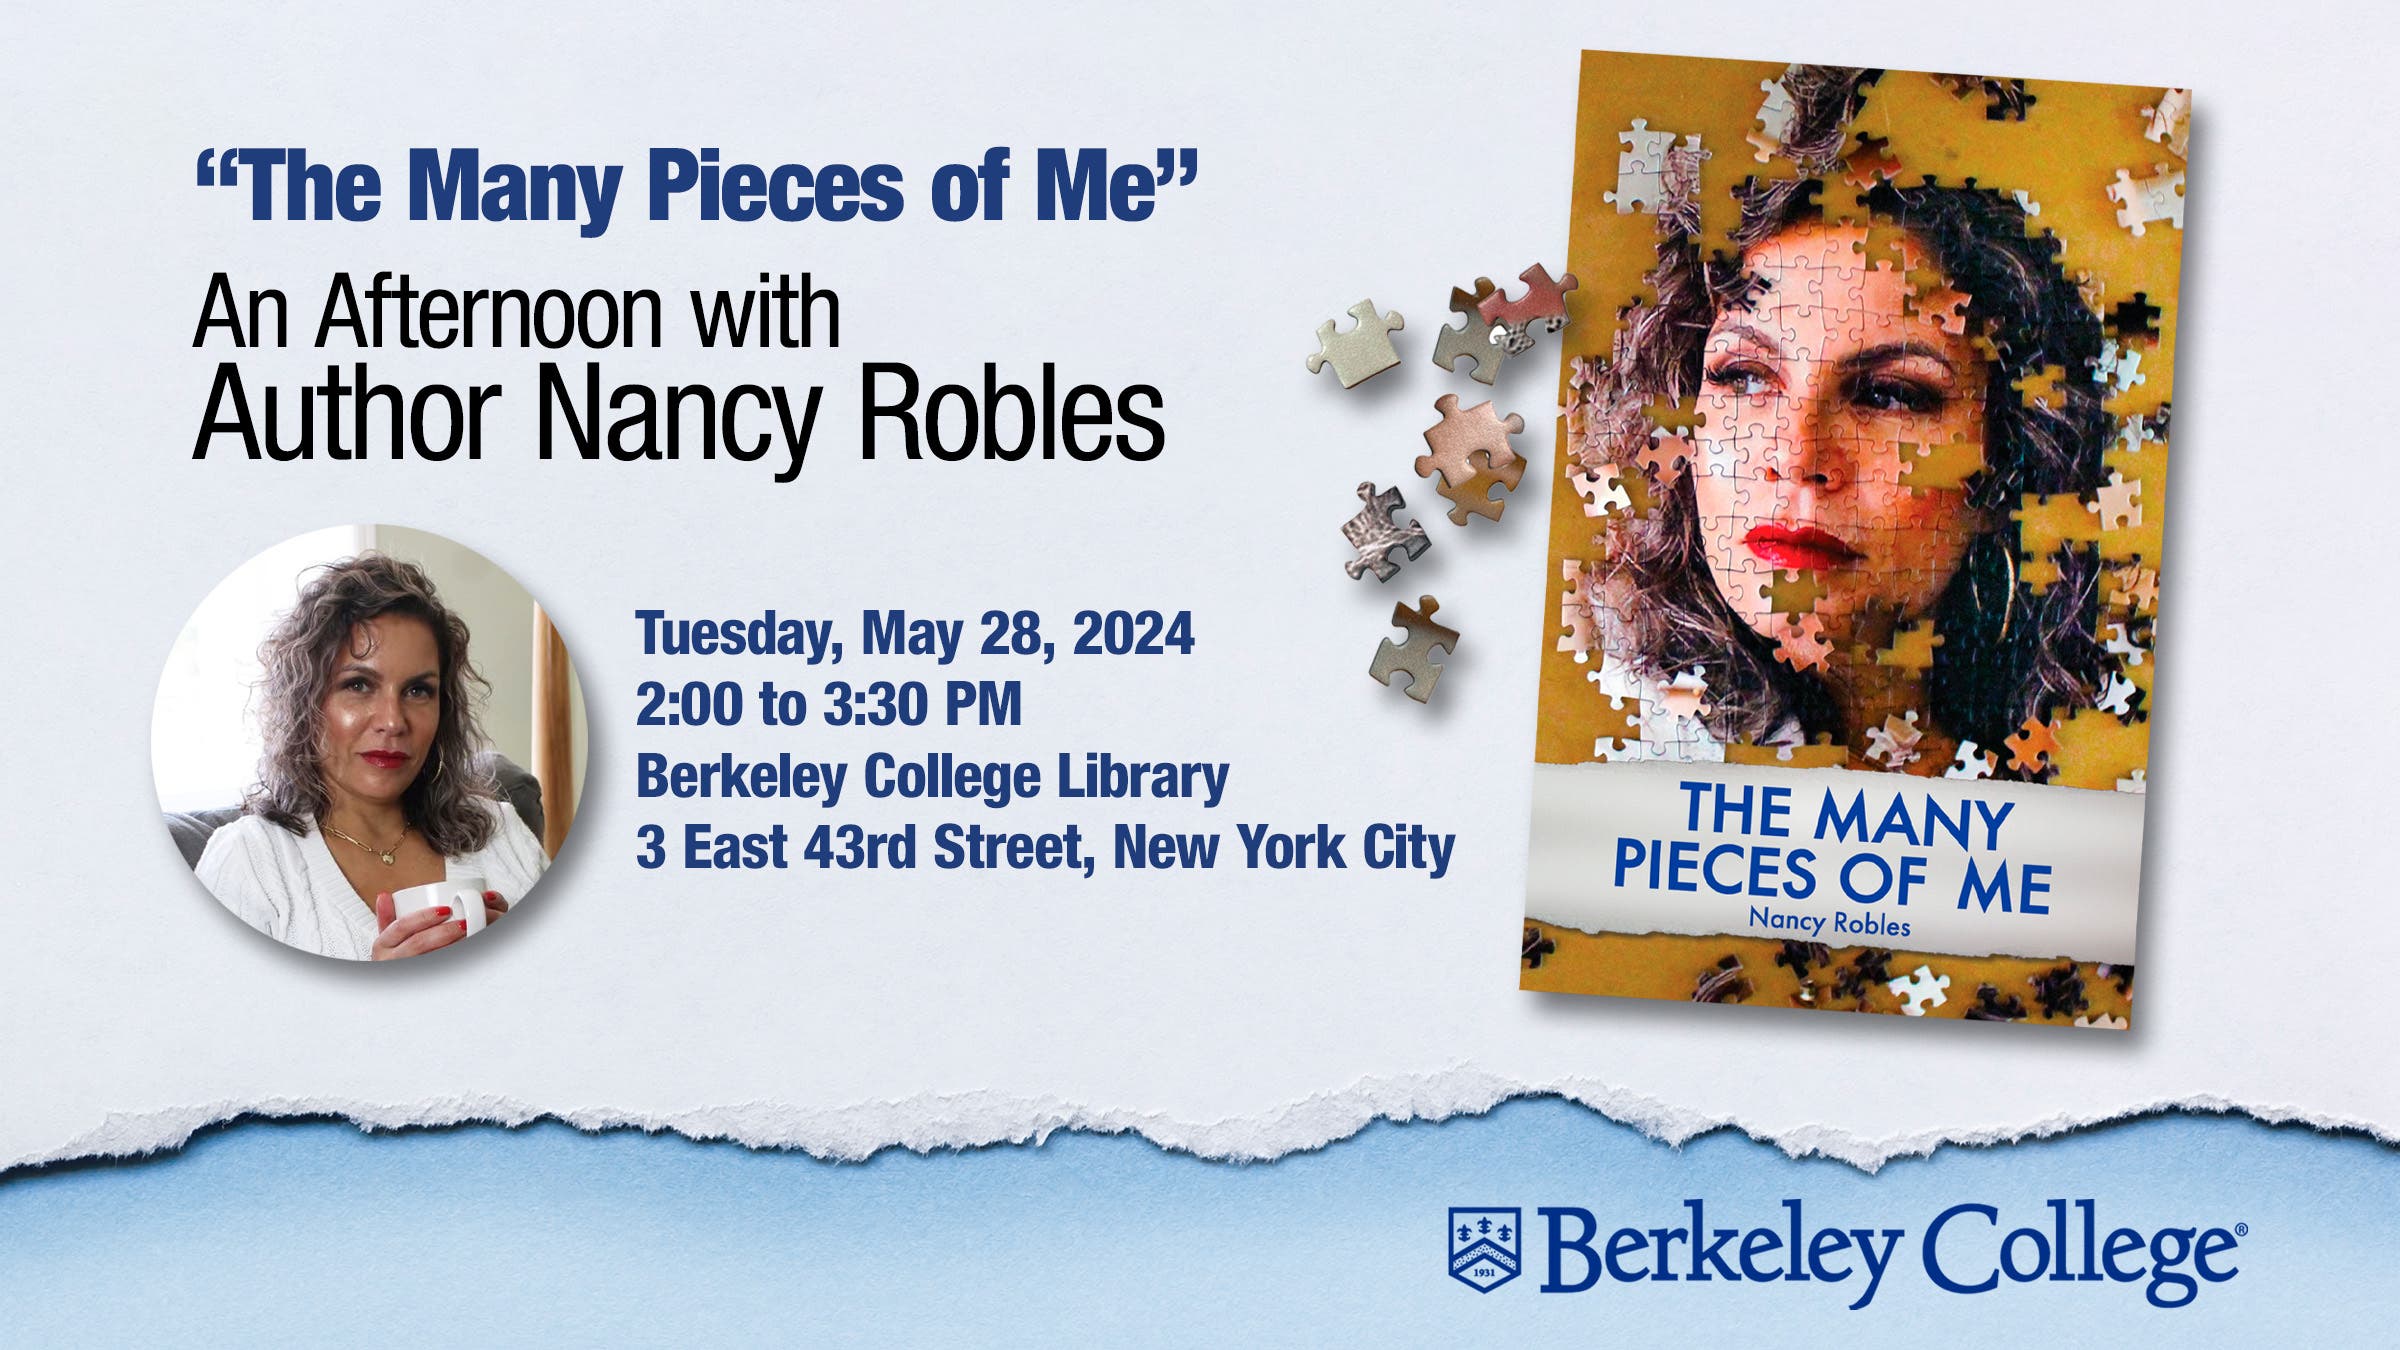 An Afternoon with Author Nancy Robles